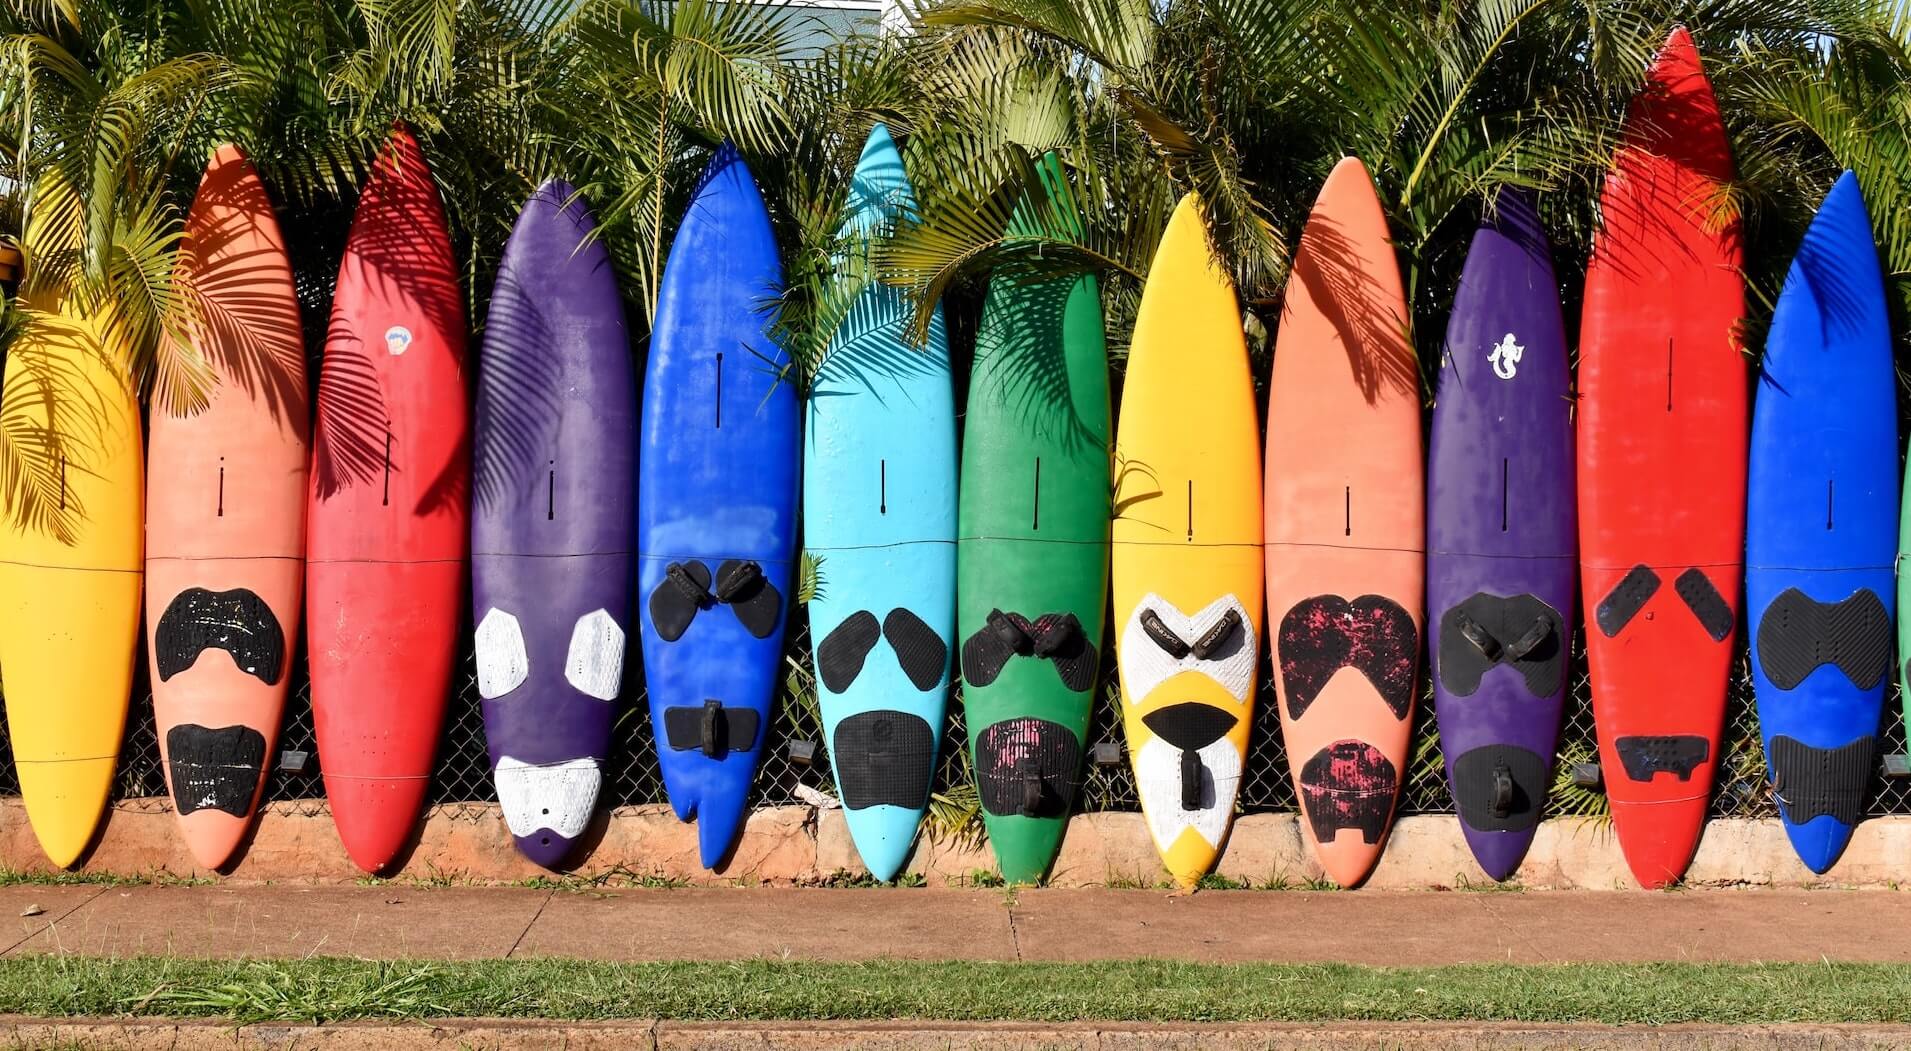 Colorful surfboards lined up